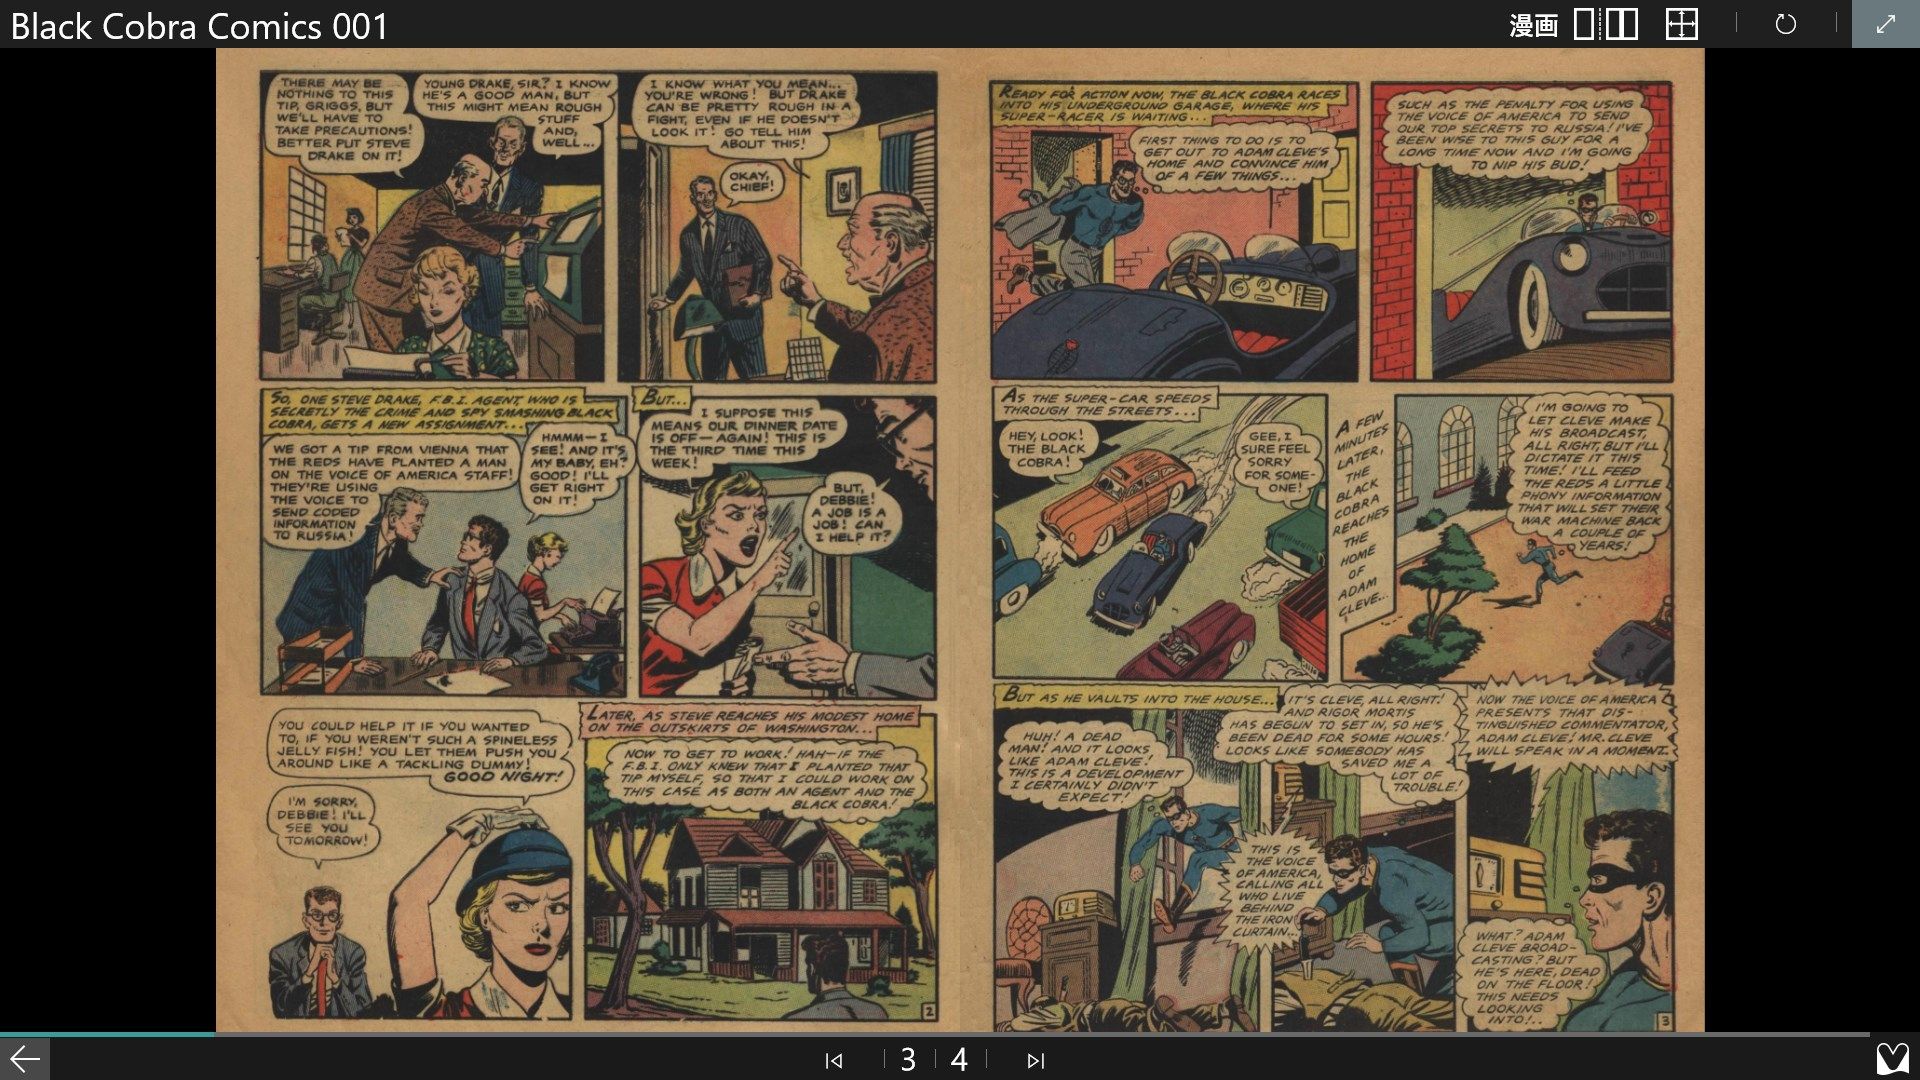 The reader view displaying a comic book in a double page layout with the app bars visible.